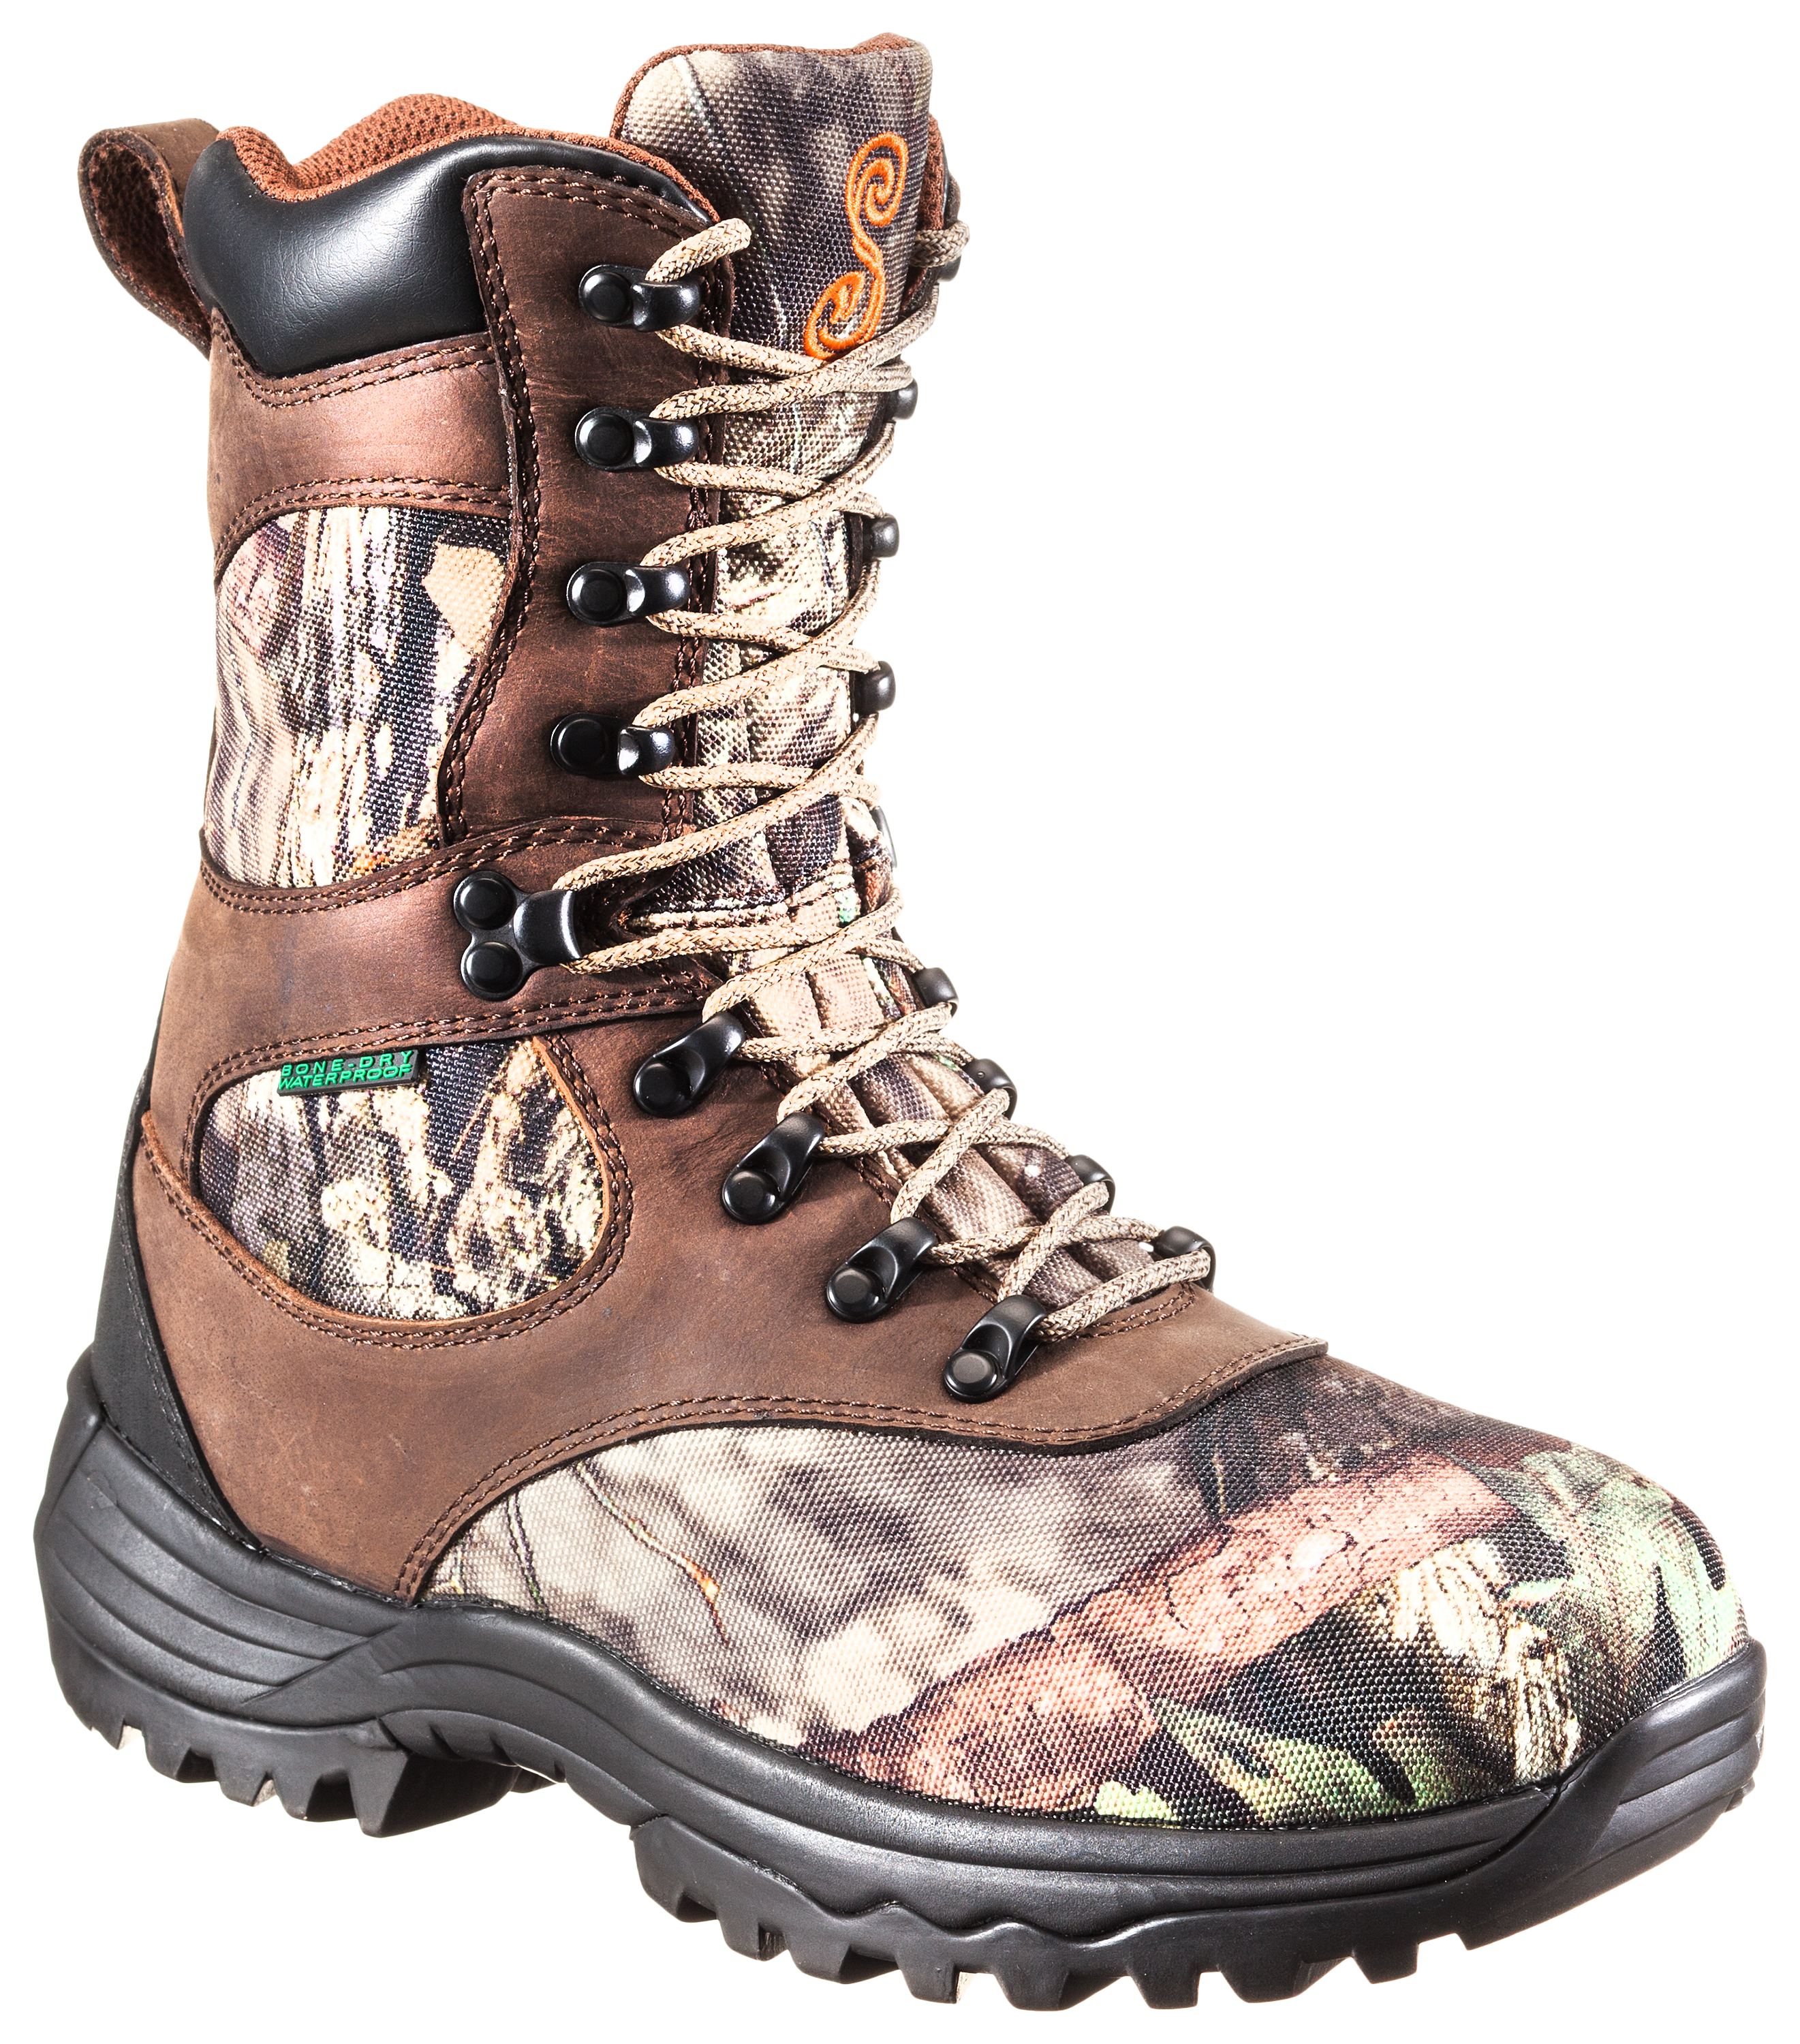 Outland Women's Waterproof Camo Ankle Hiking Boots Size 6